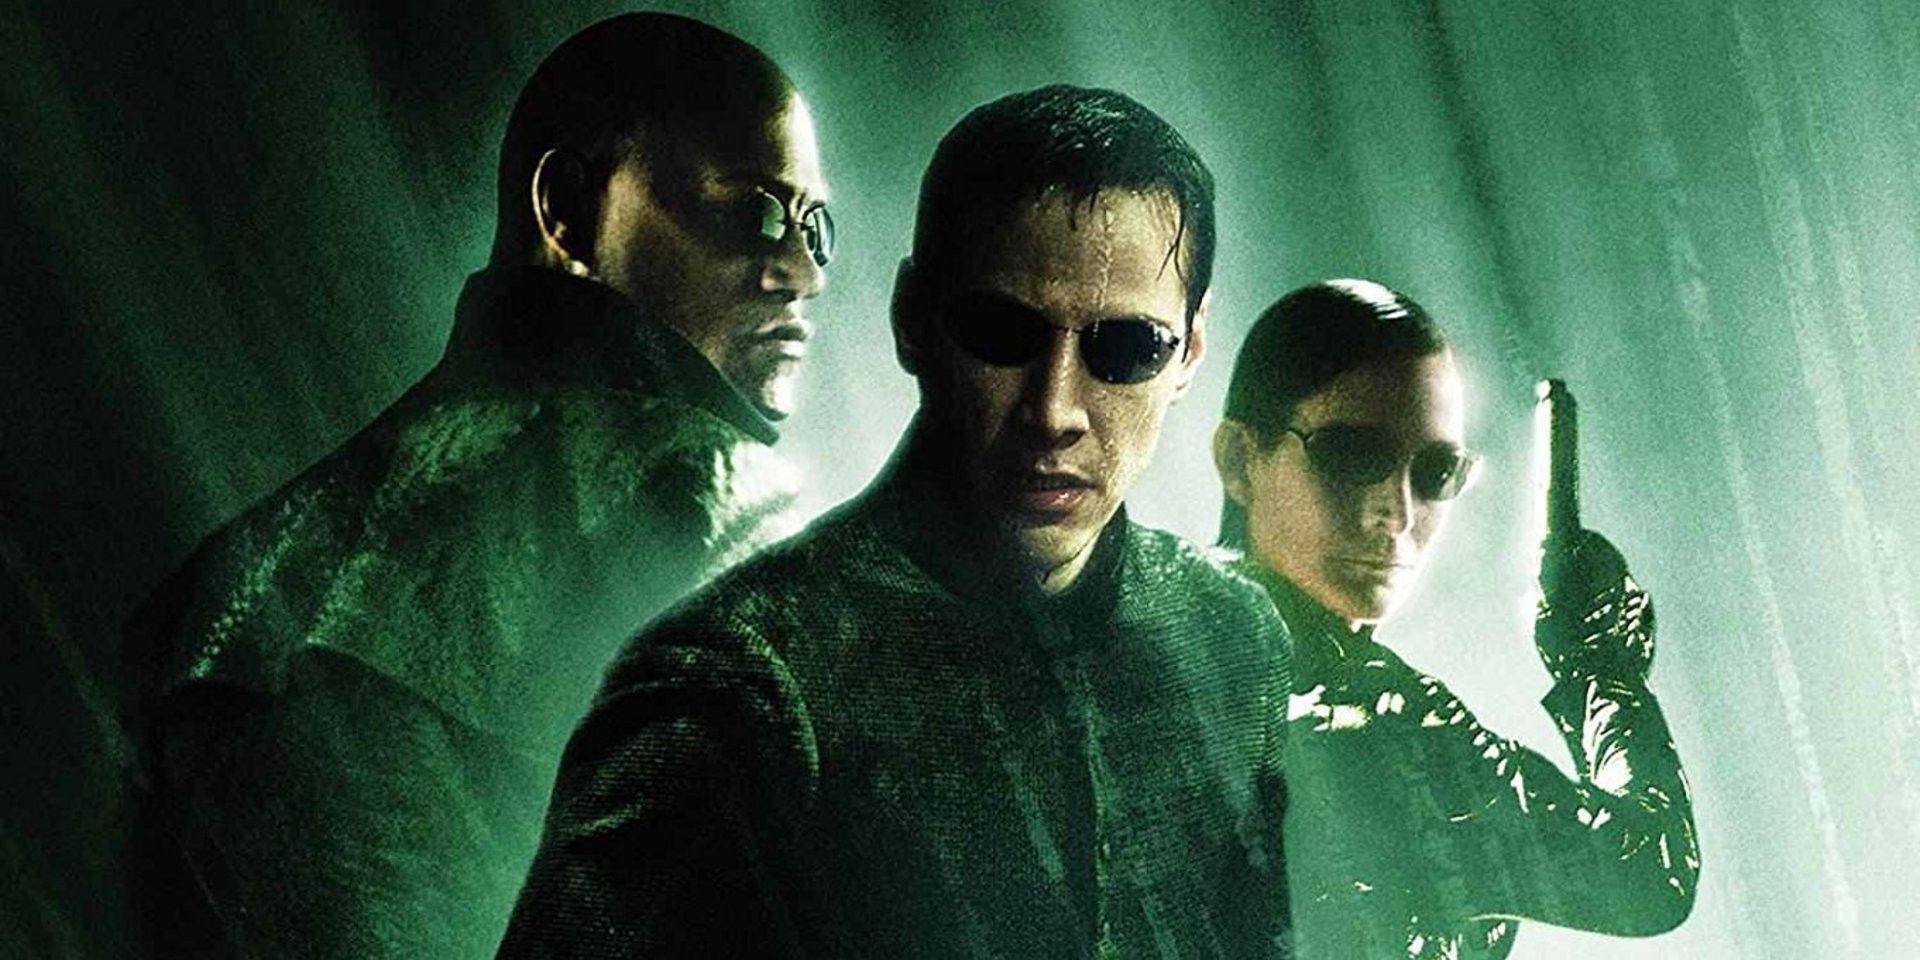 Neo, Trinity and Morpheus in a poster for The Matrix